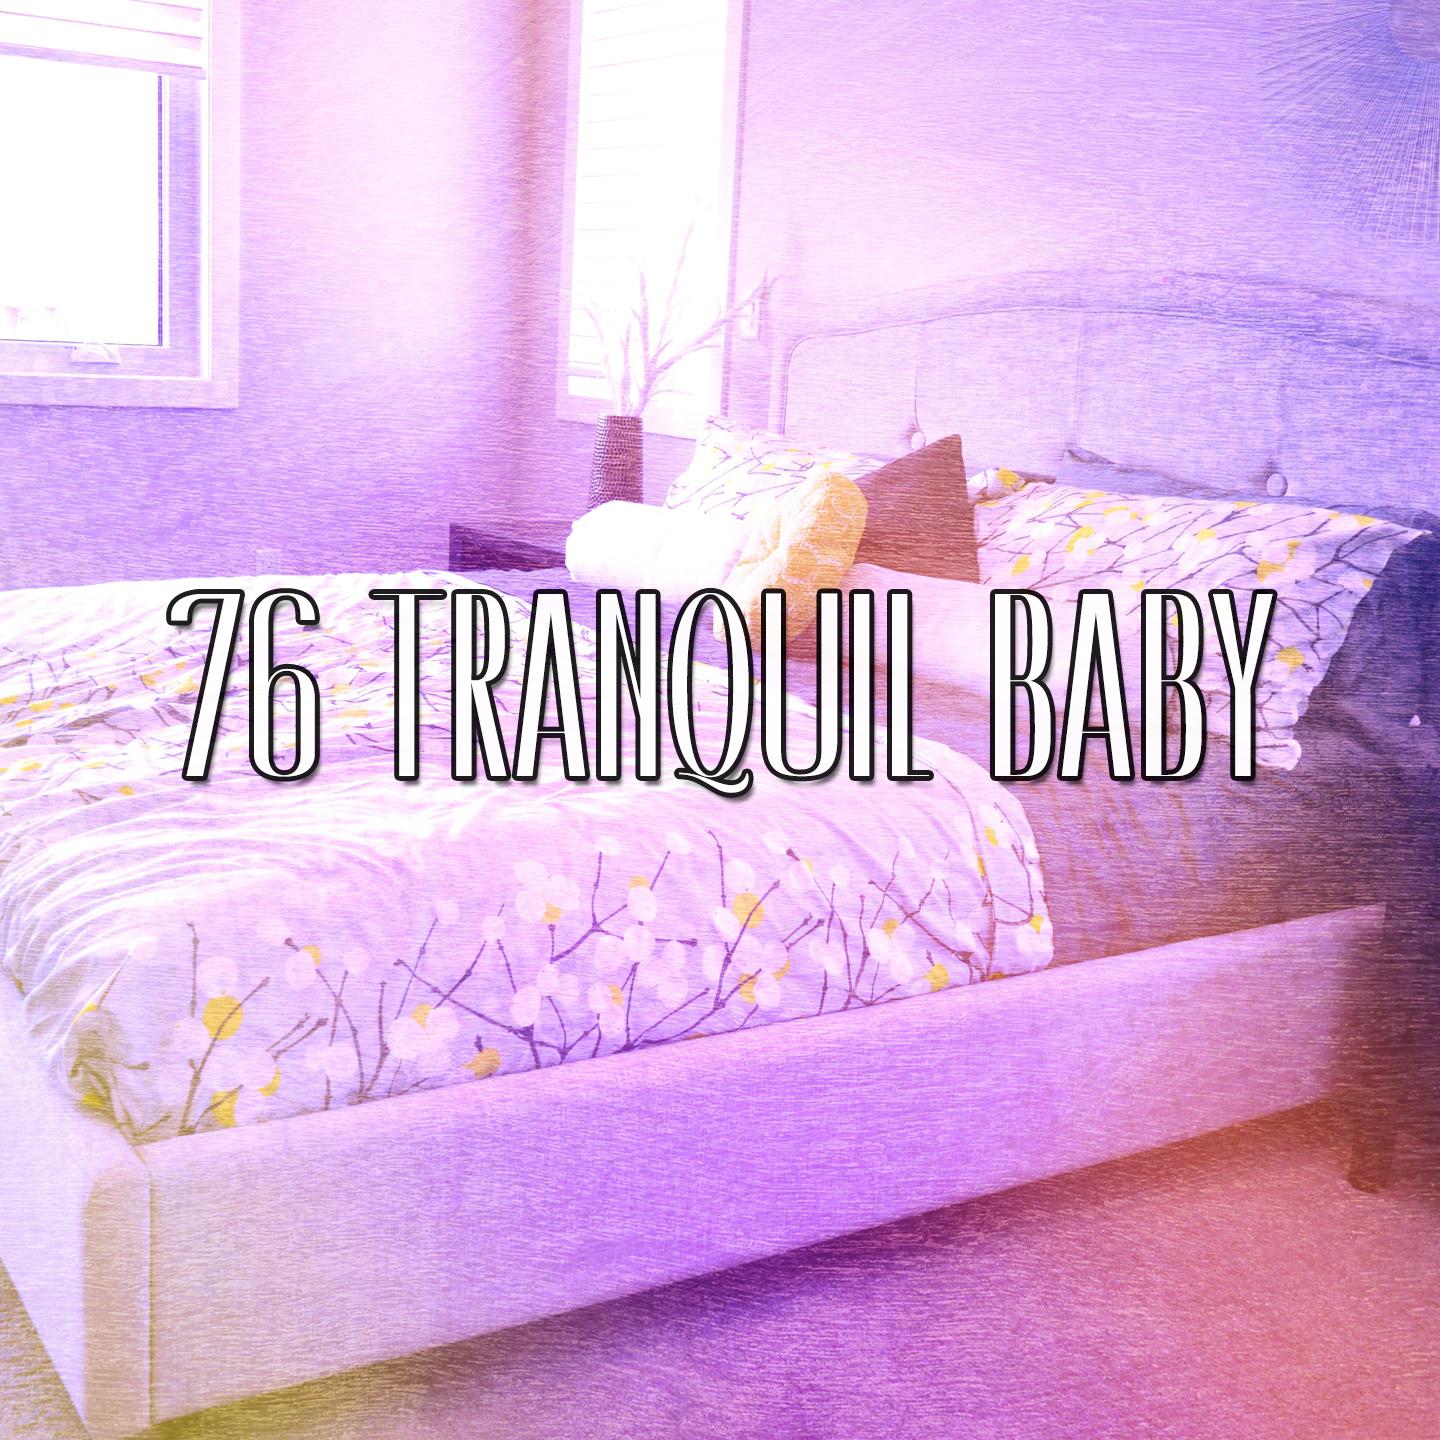 76 Tranquil Baby